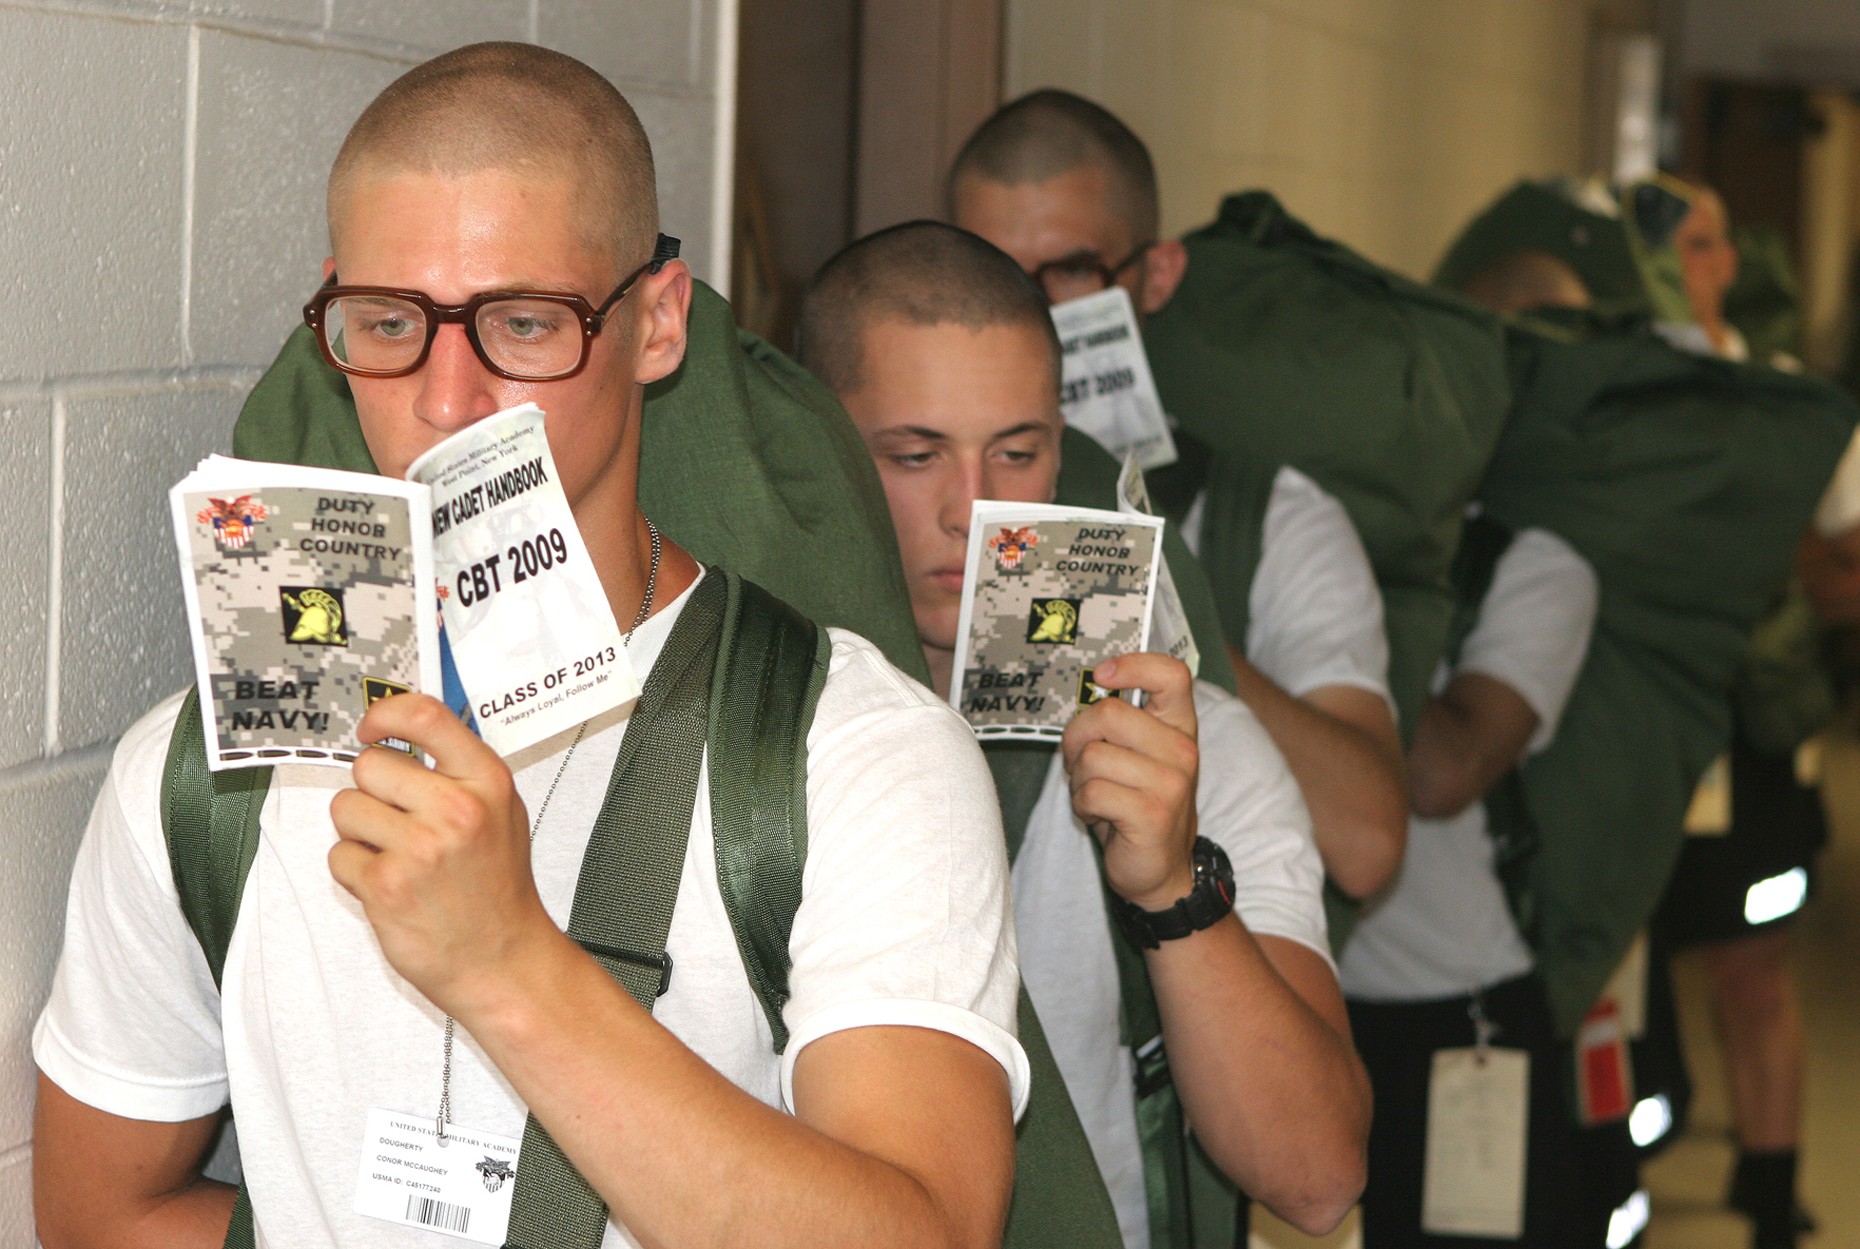 r-day: class of 2013 enters west point | article | the united states